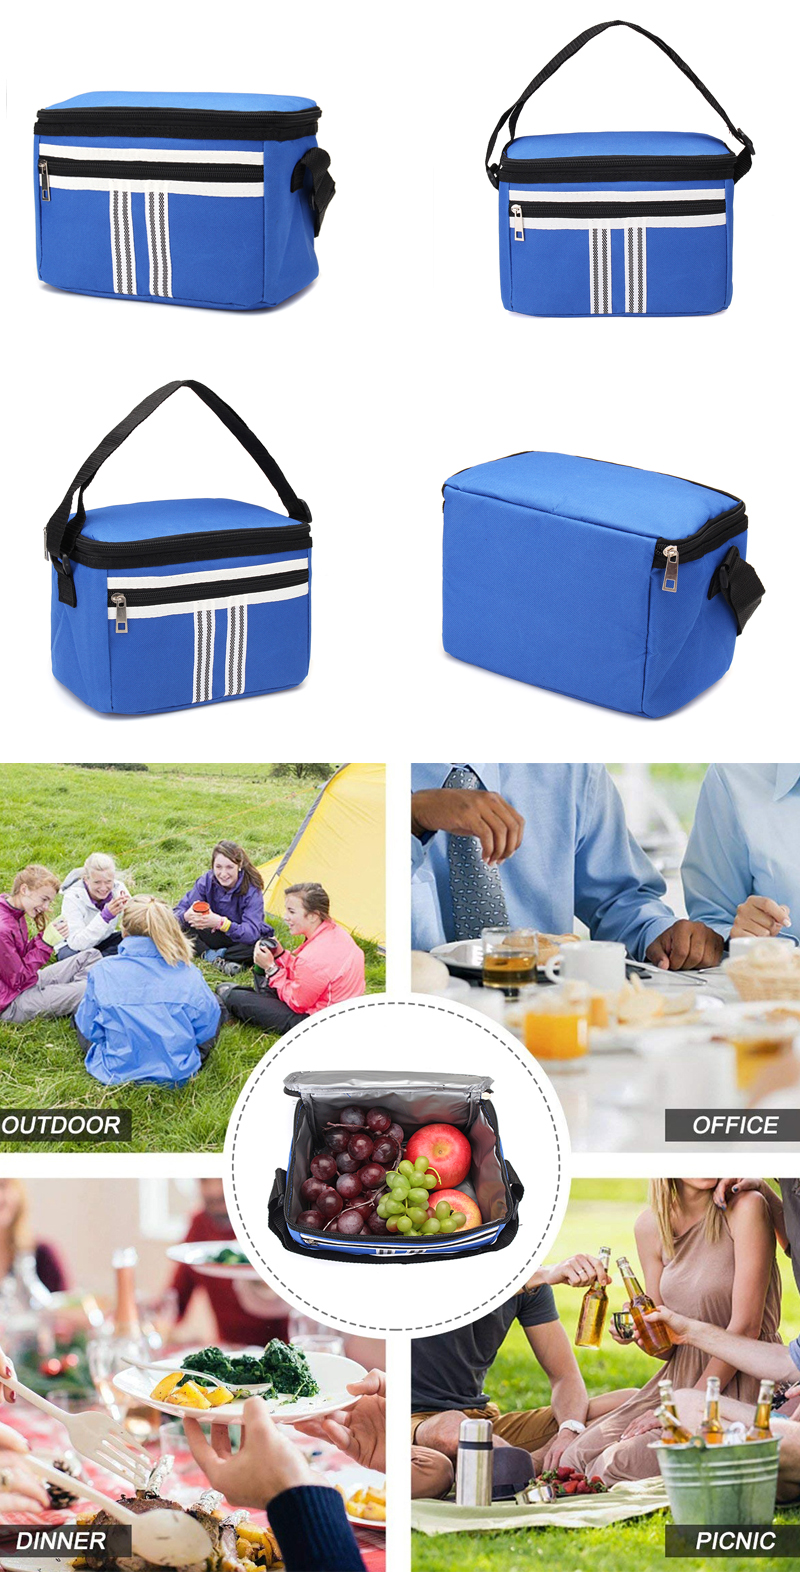 5L-Picnic-Bag-Thermal-Cooler-Insulated-Lunch-Bag-Food-Container-Pouch-Outdoor-Camping-1462699-2